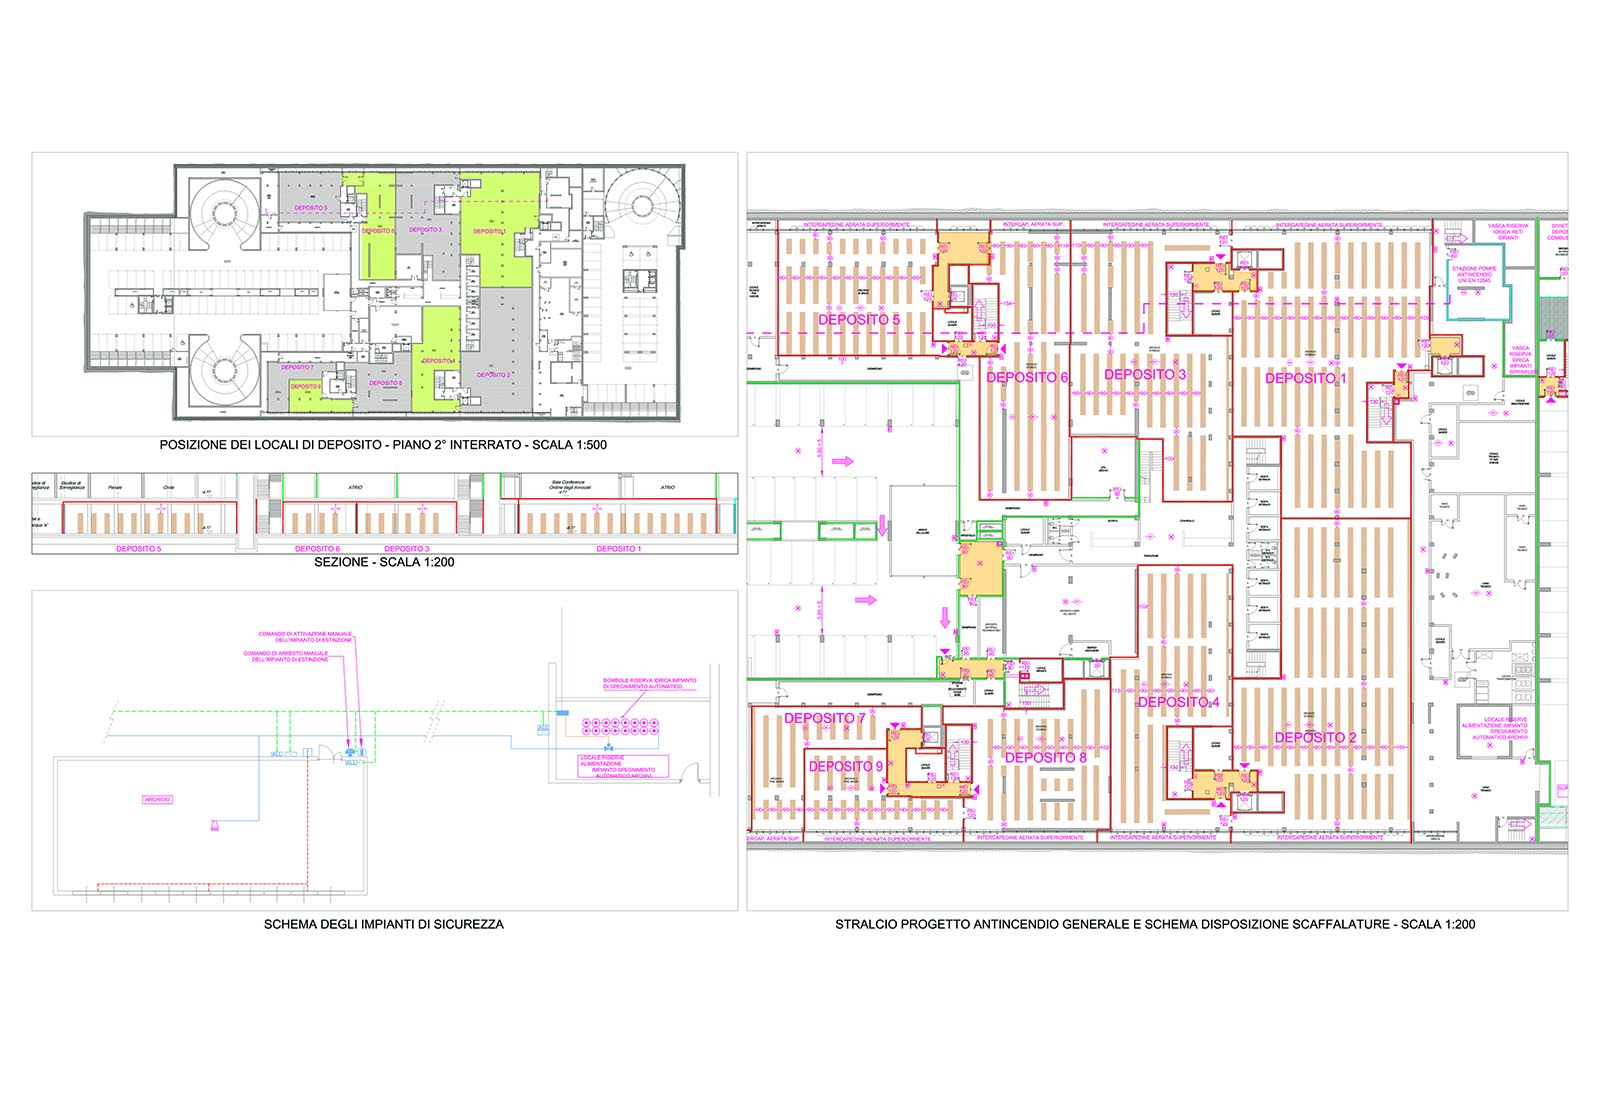 New courthouse in Trento - Fire protection basement floor plan